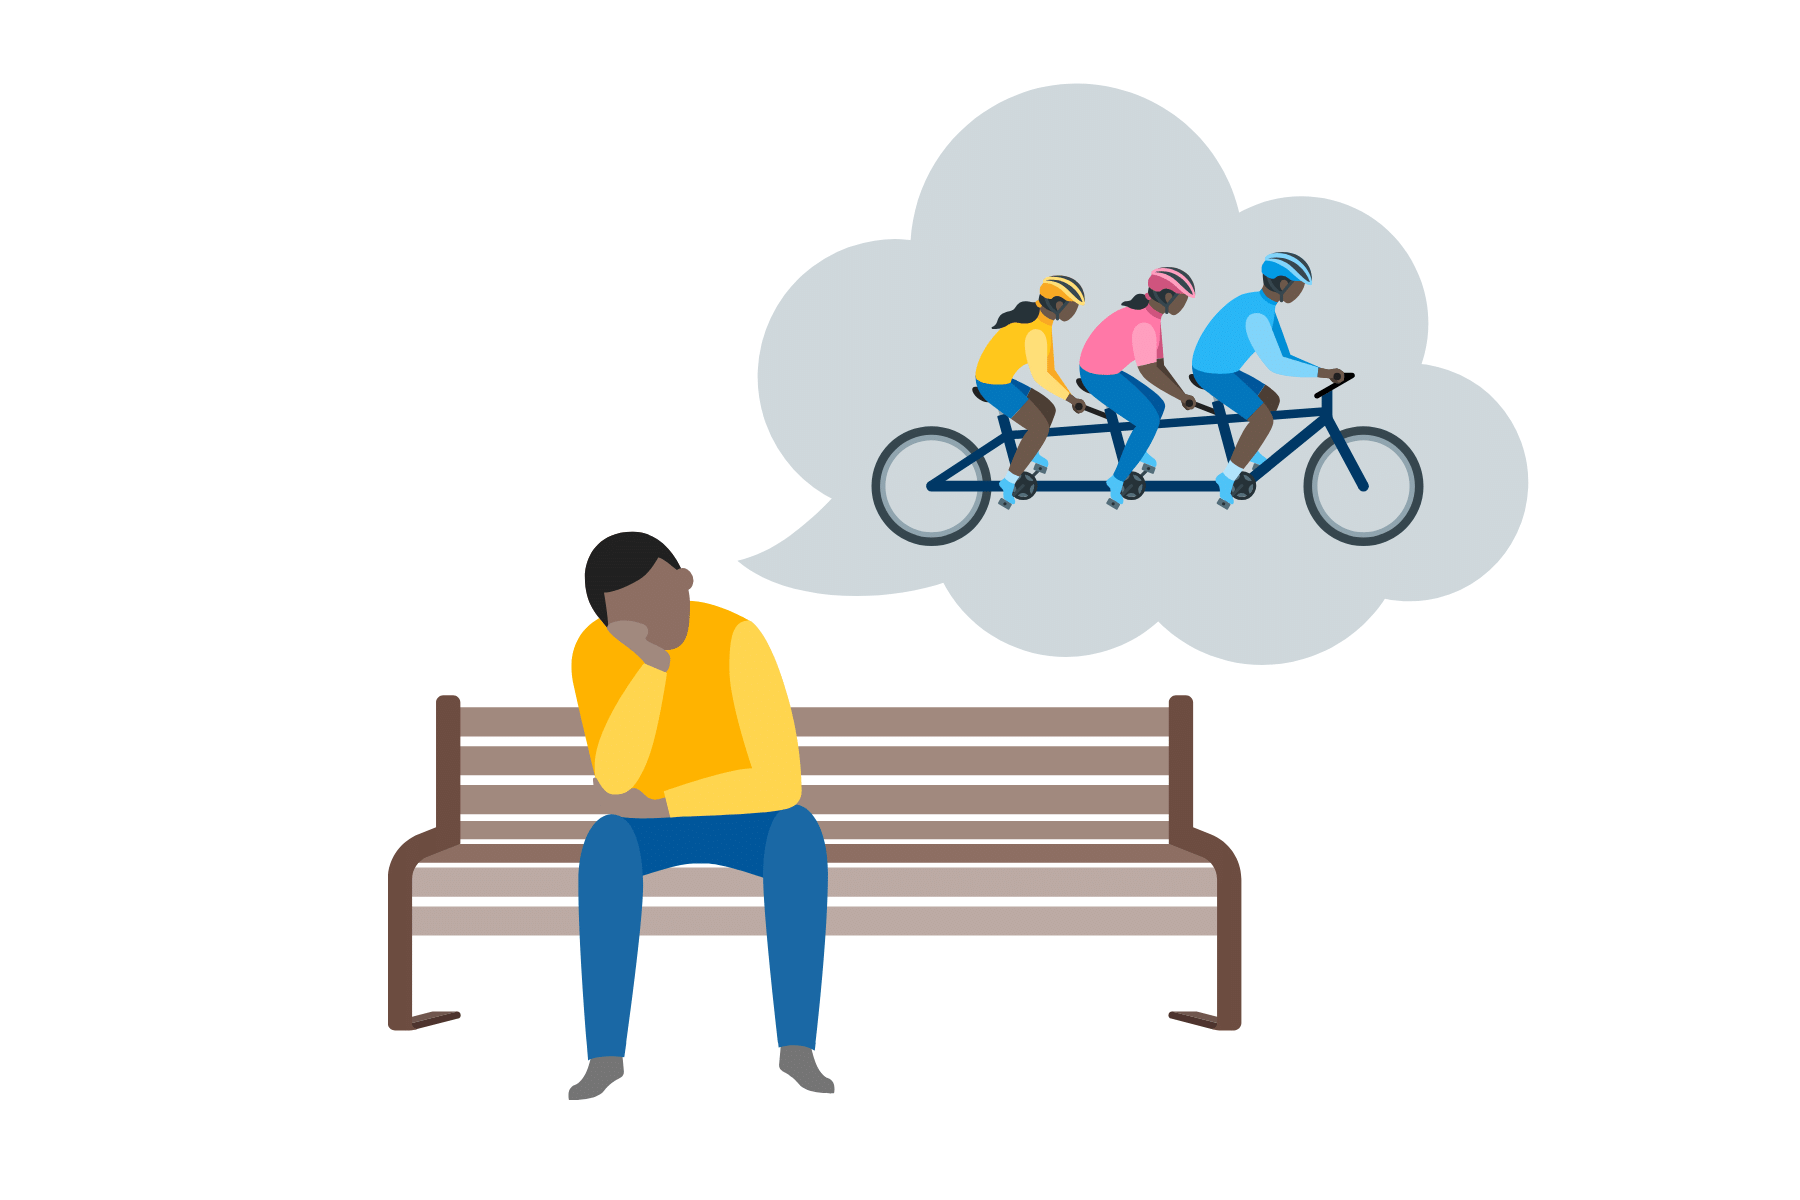 image of a college age student sitting on a bench with a thought bubble of a family riding bikes